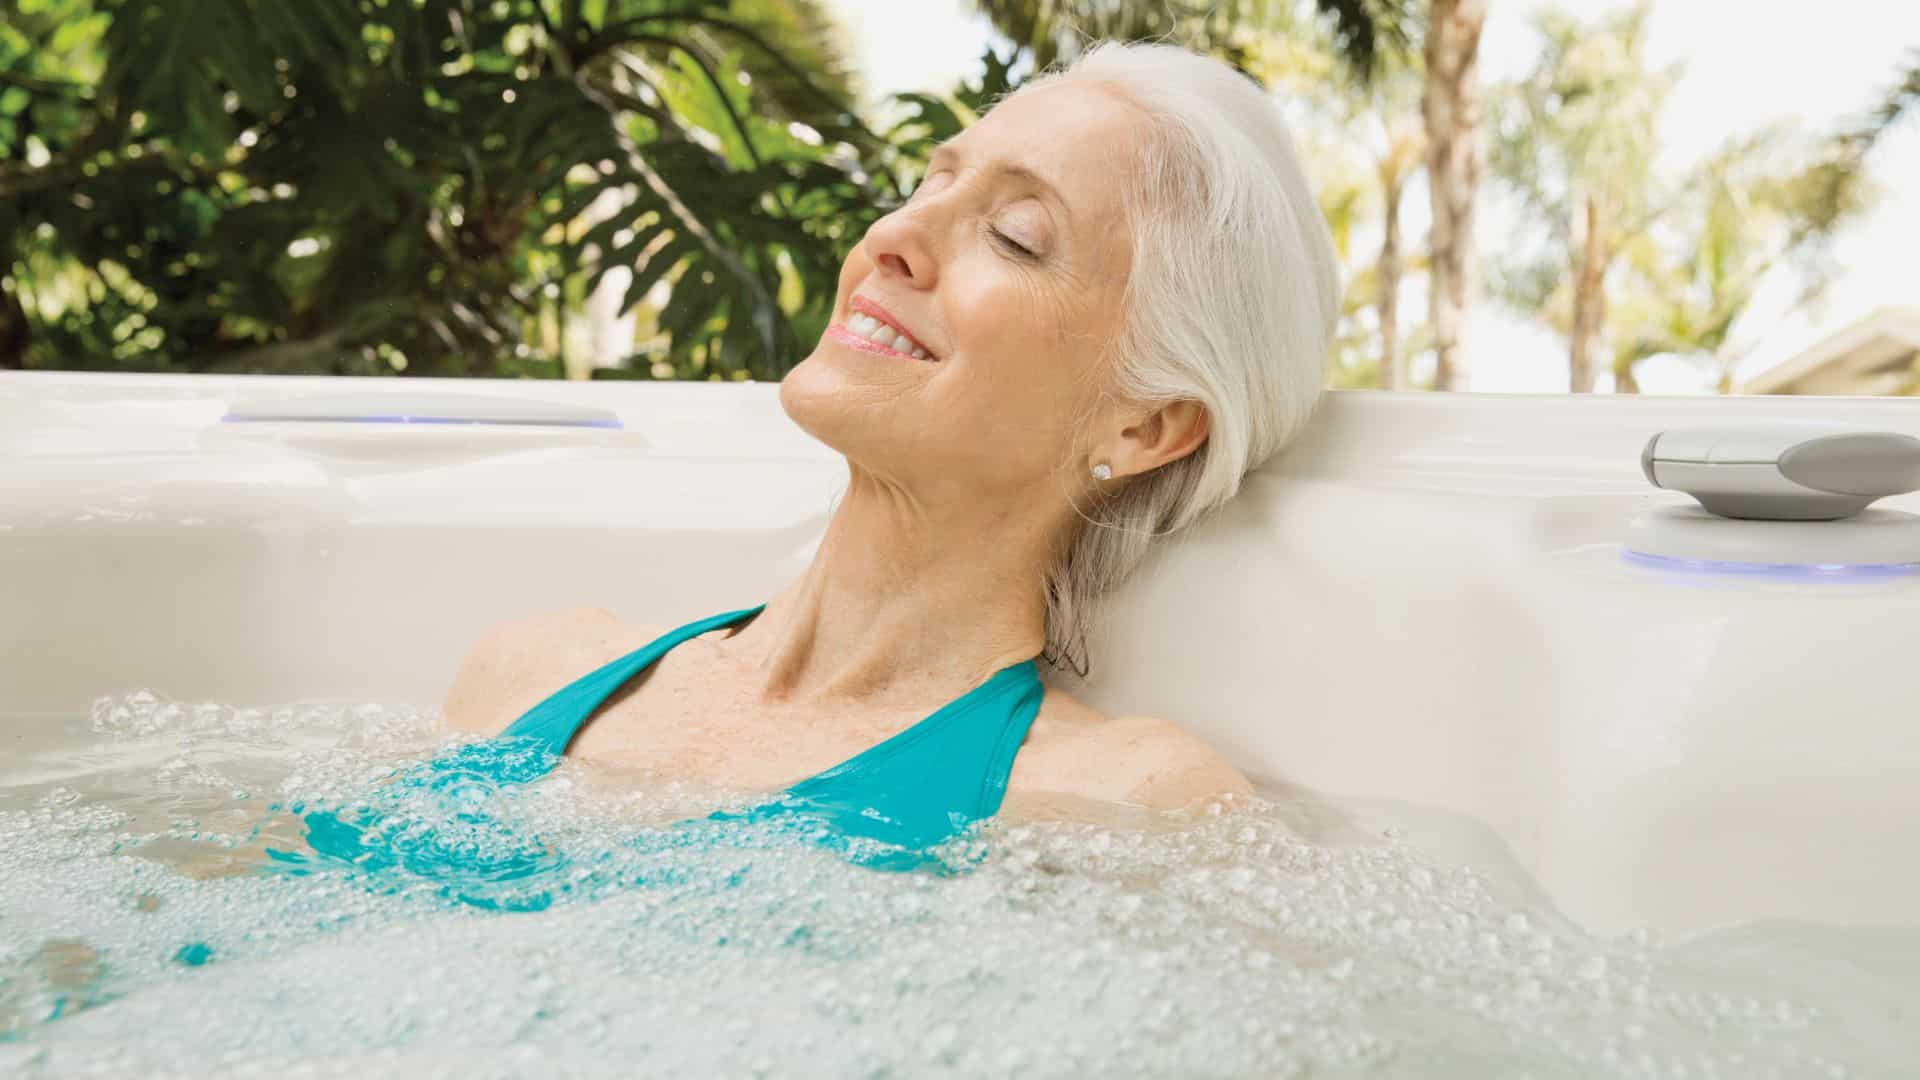 How Does a Hot Spring Spa Help with Back Pain?